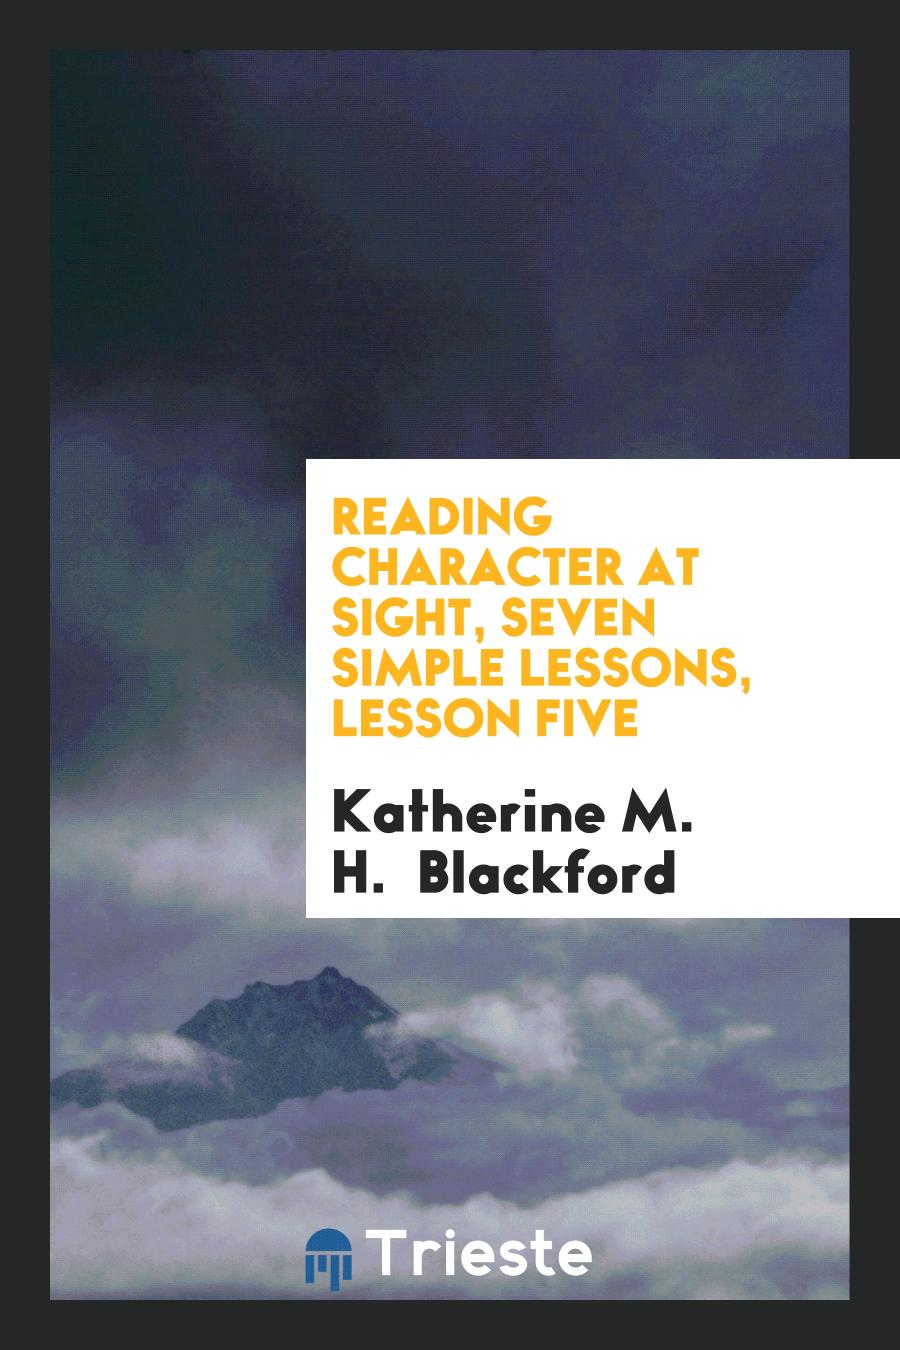 Reading Character at Sight, seven simple lessons, Lesson Five